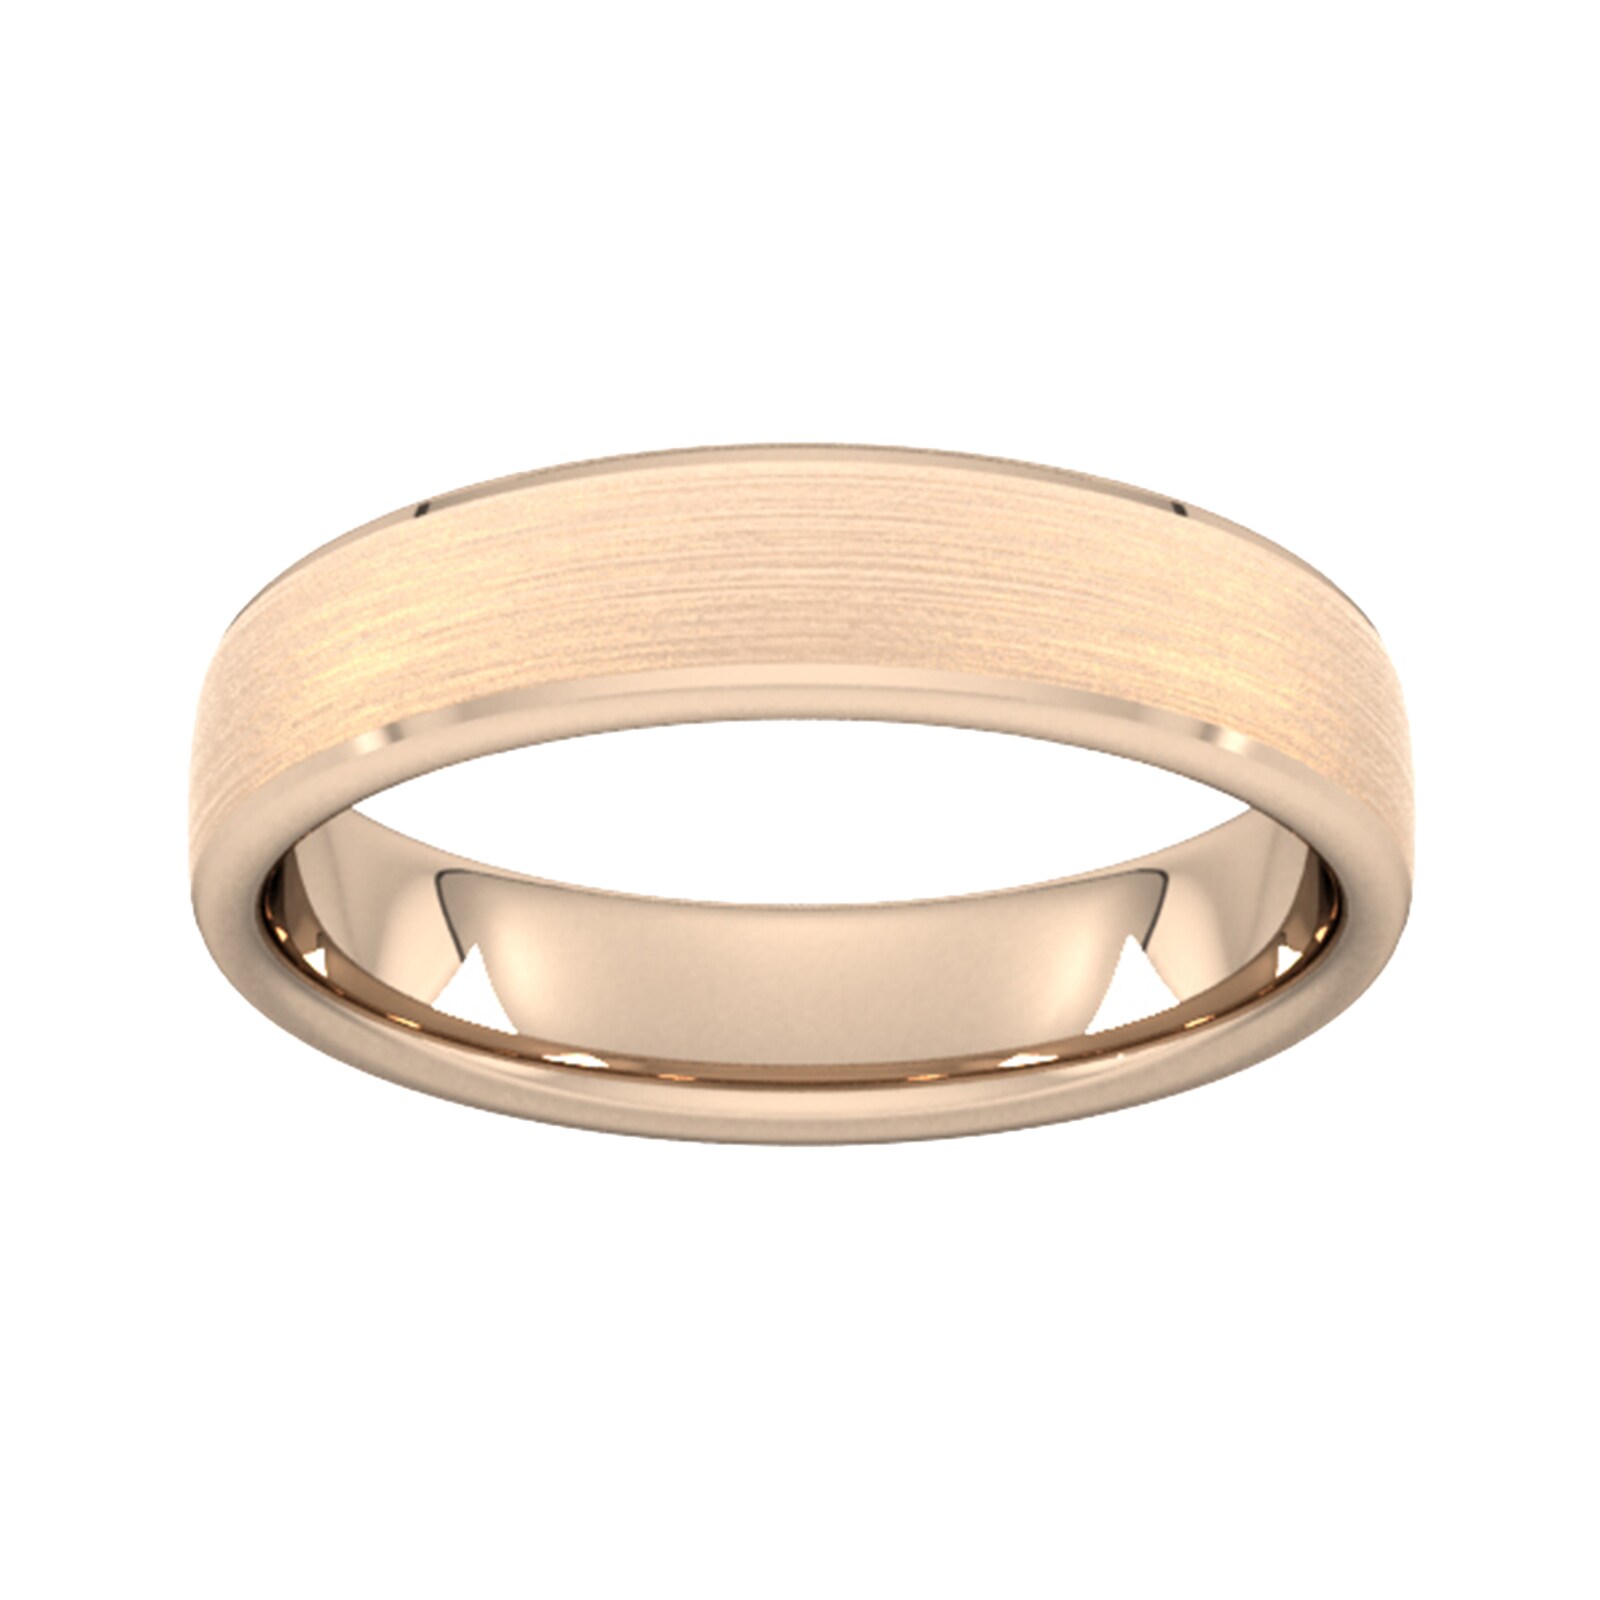 5mm Slight Court Extra Heavy Polished Chamfered Edges With Matt Centre Wedding Ring In 9 Carat Rose Gold - Ring Size U